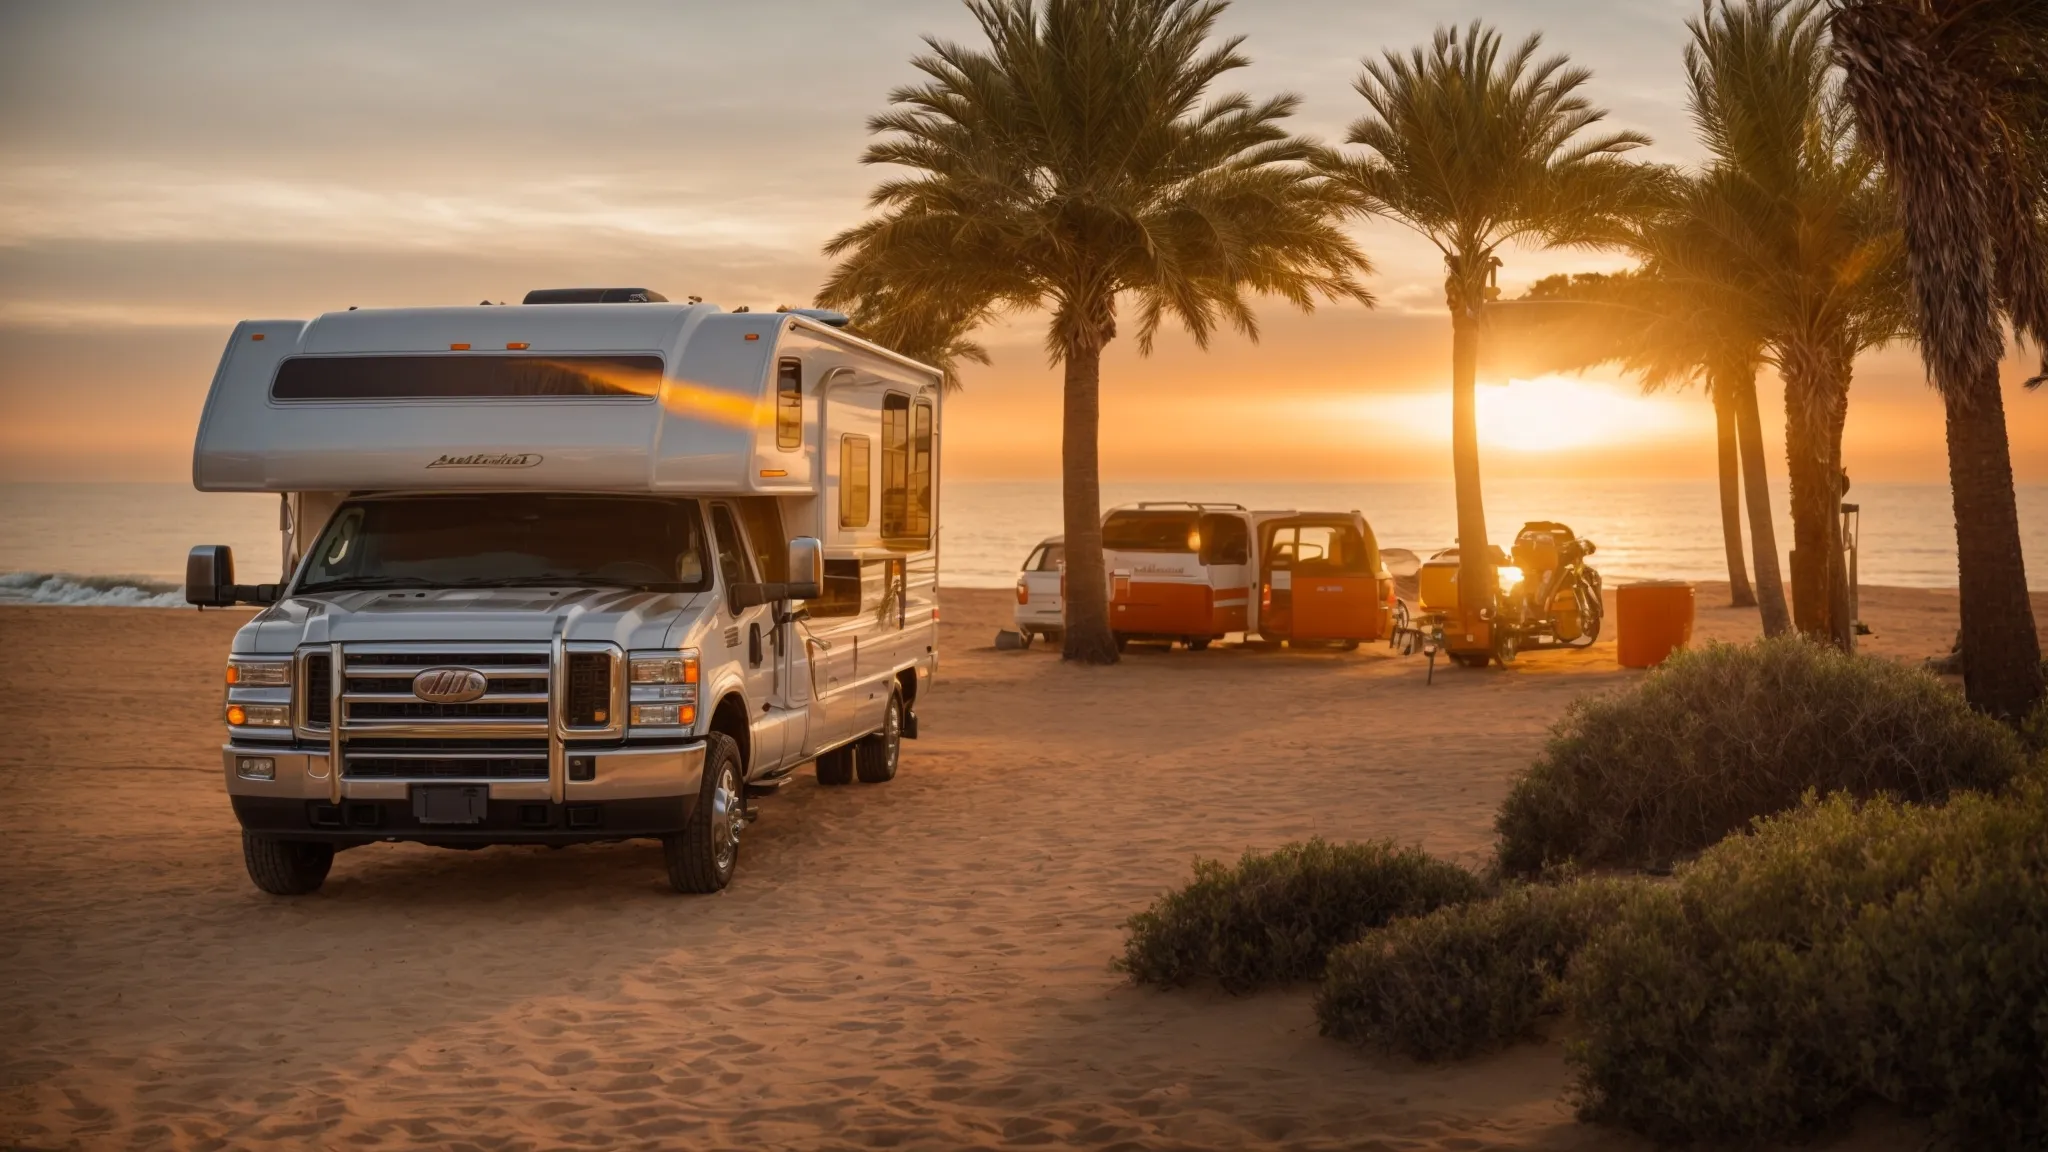 recreational vehicles are neatly arranged under the warm glow of the setting sun, with the pacific ocean's gentle waves in the foreground.